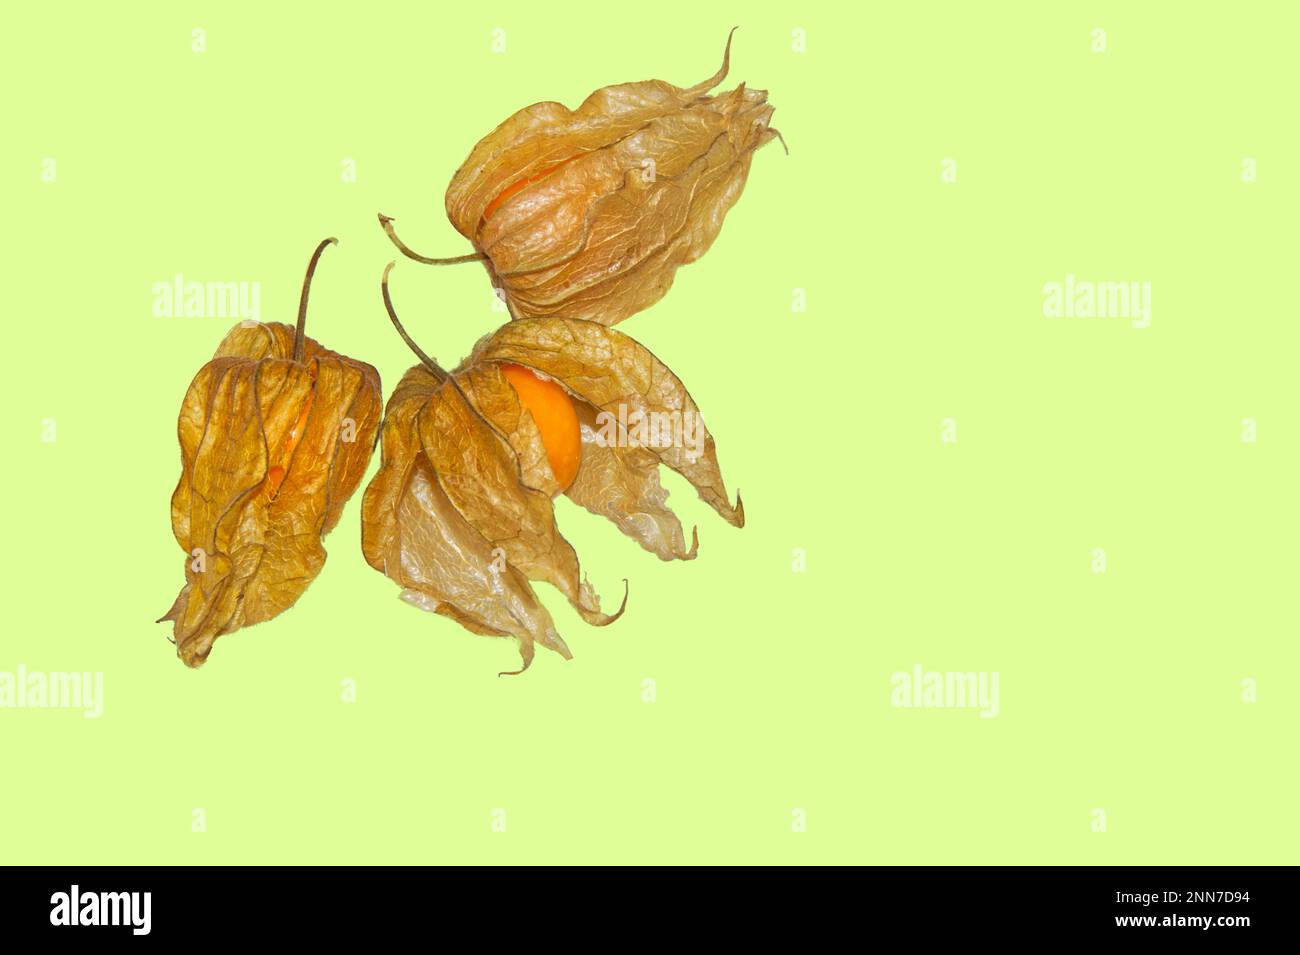 Above view of three physalis fruits in orange color against a light green background Stock Photo